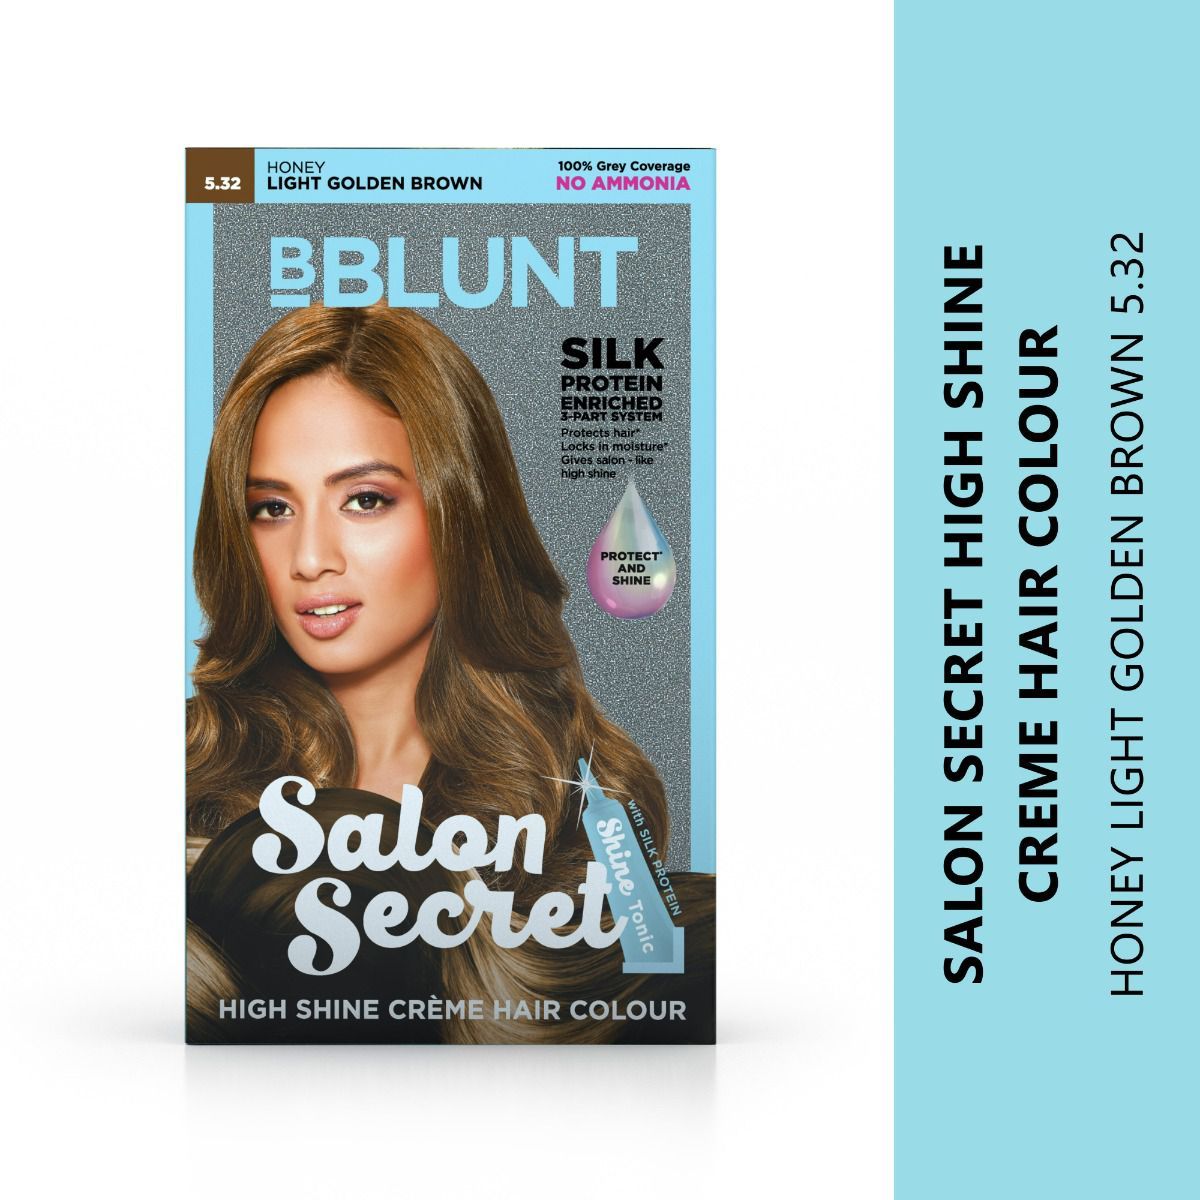 Introducing Balayage Hair Color for Brunettes  Taking Your Dark Brown to Light  Golden Brown  XO Salon  Spa